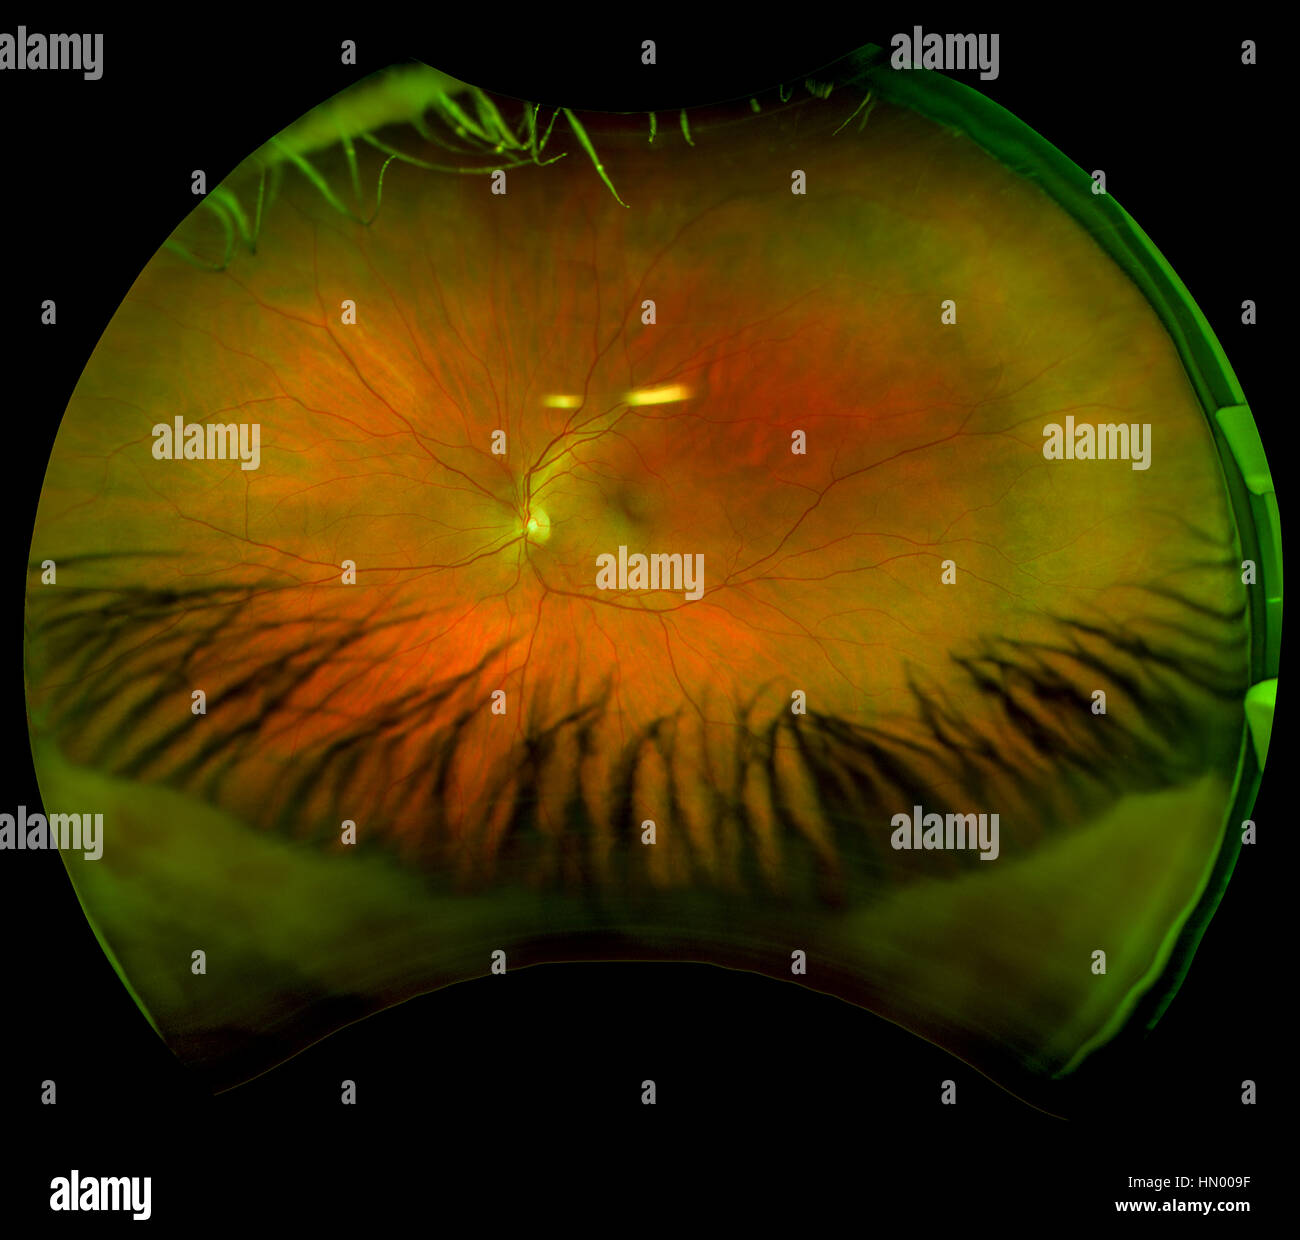 An ultra wide digital retinal scan of a human eye showing the veins and capillaries in a retina. Stock Photo